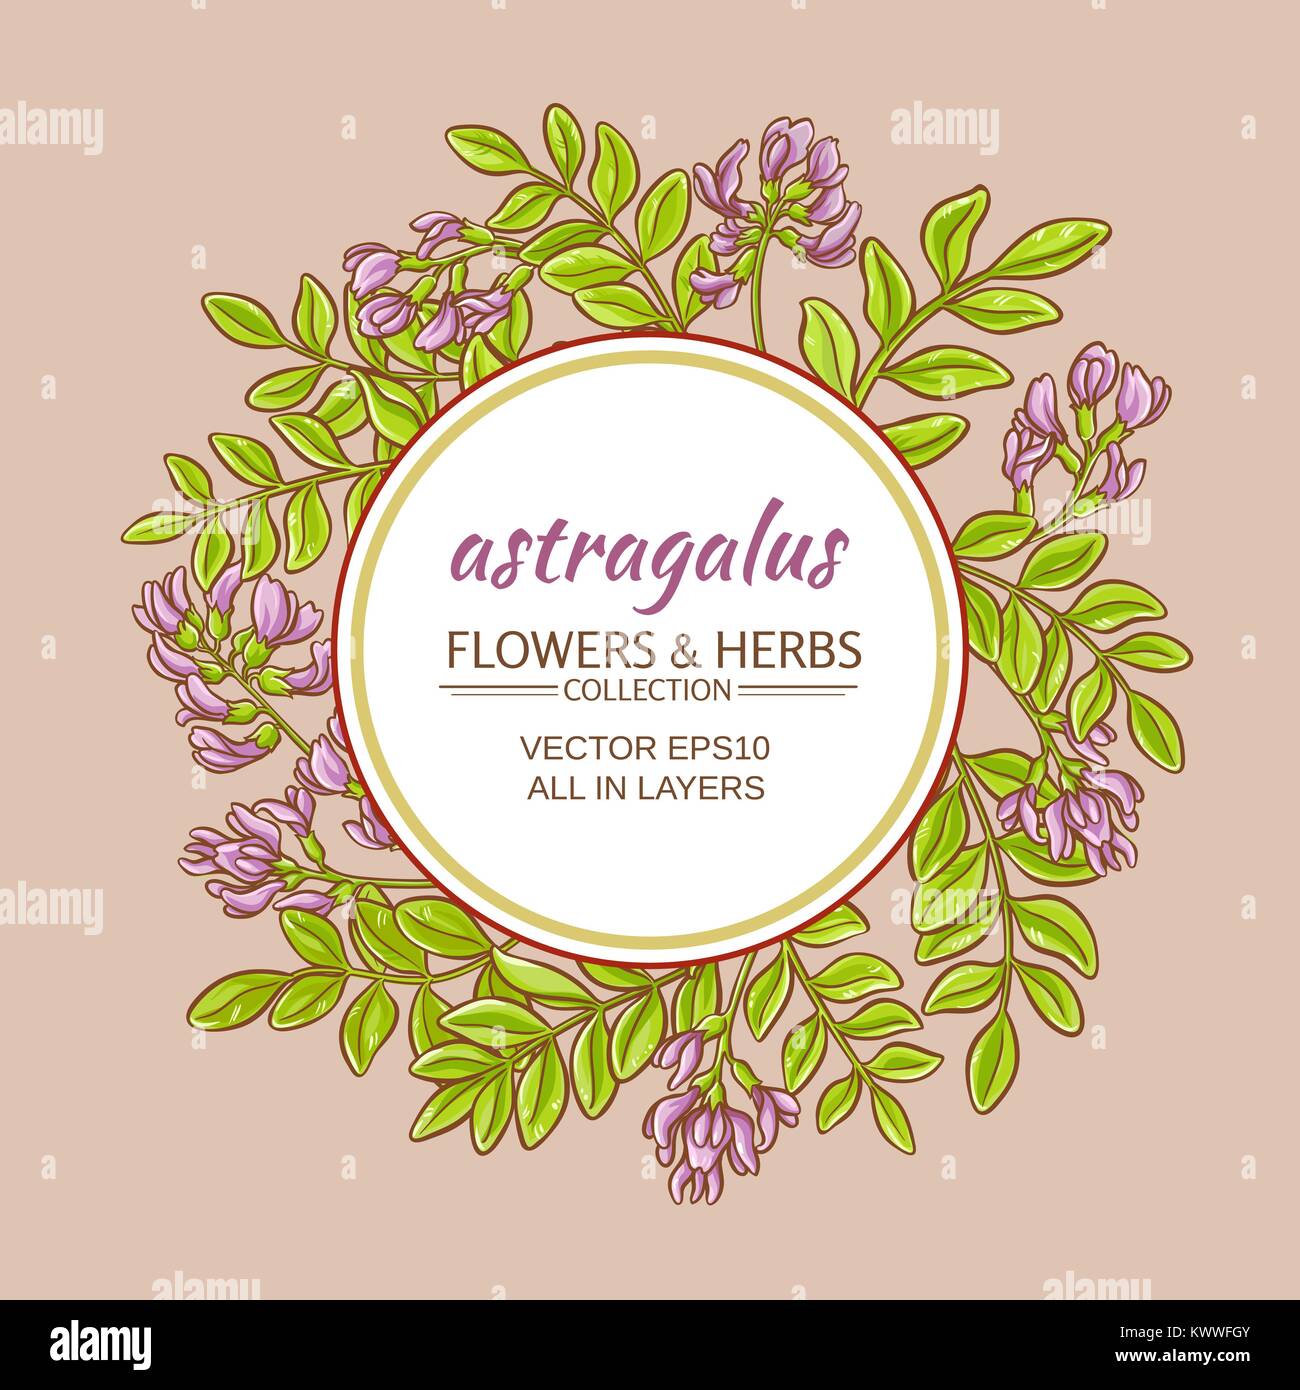 astragalus plant vector frame on color backgrond Stock Vector